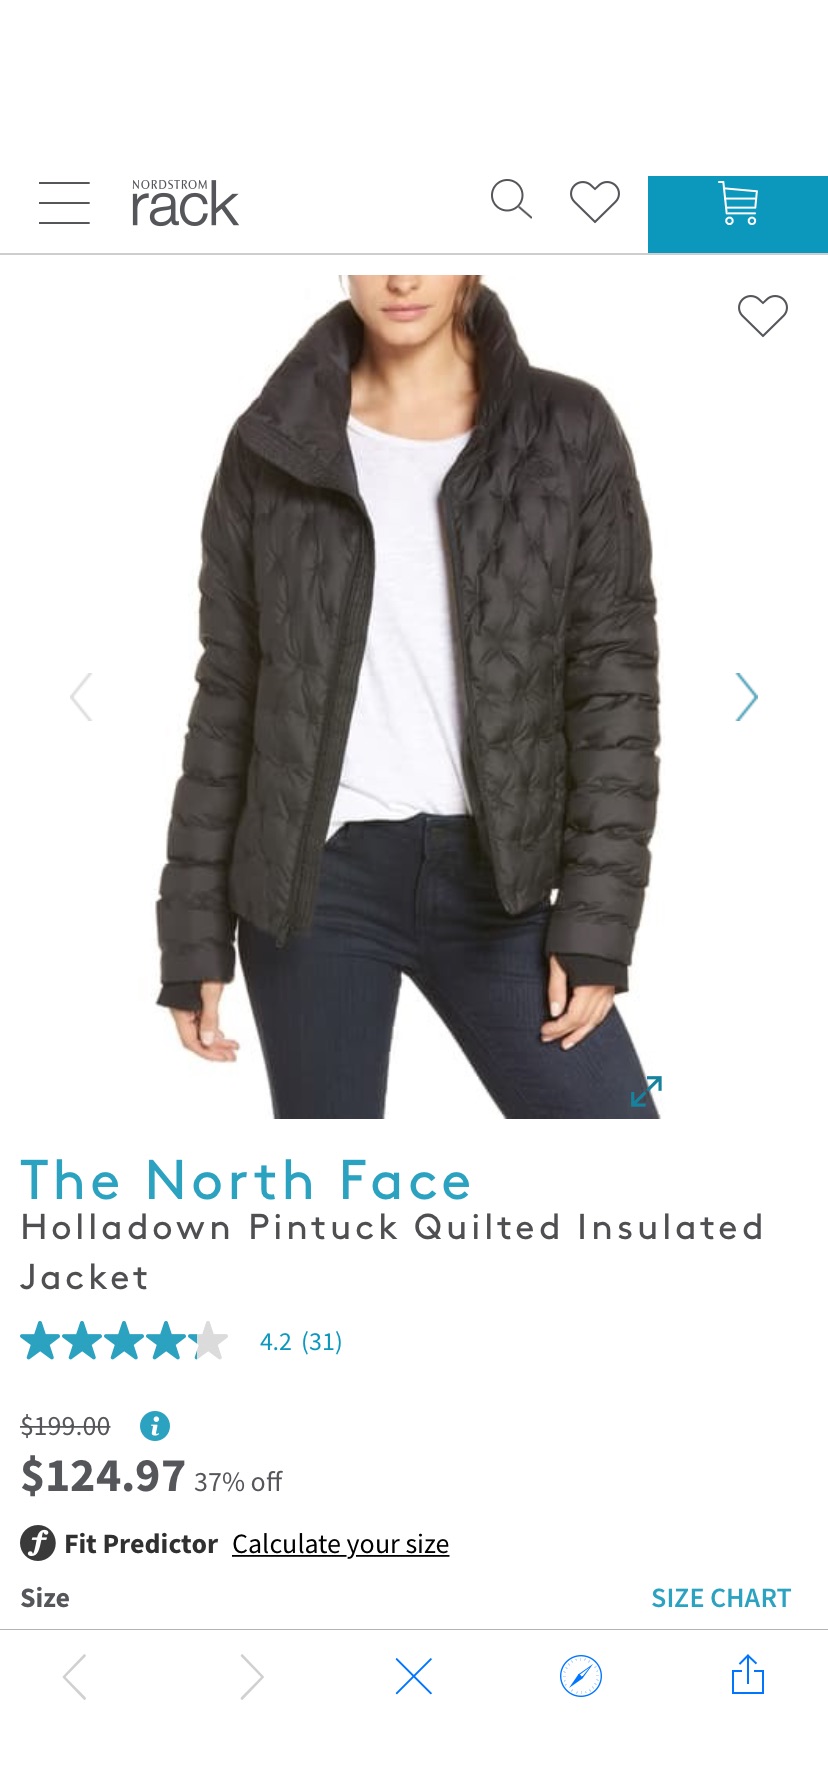 The North Face 轻便羽绒服| Holladown Pintuck Quilted Insulated Jacket | Nordstrom Rack